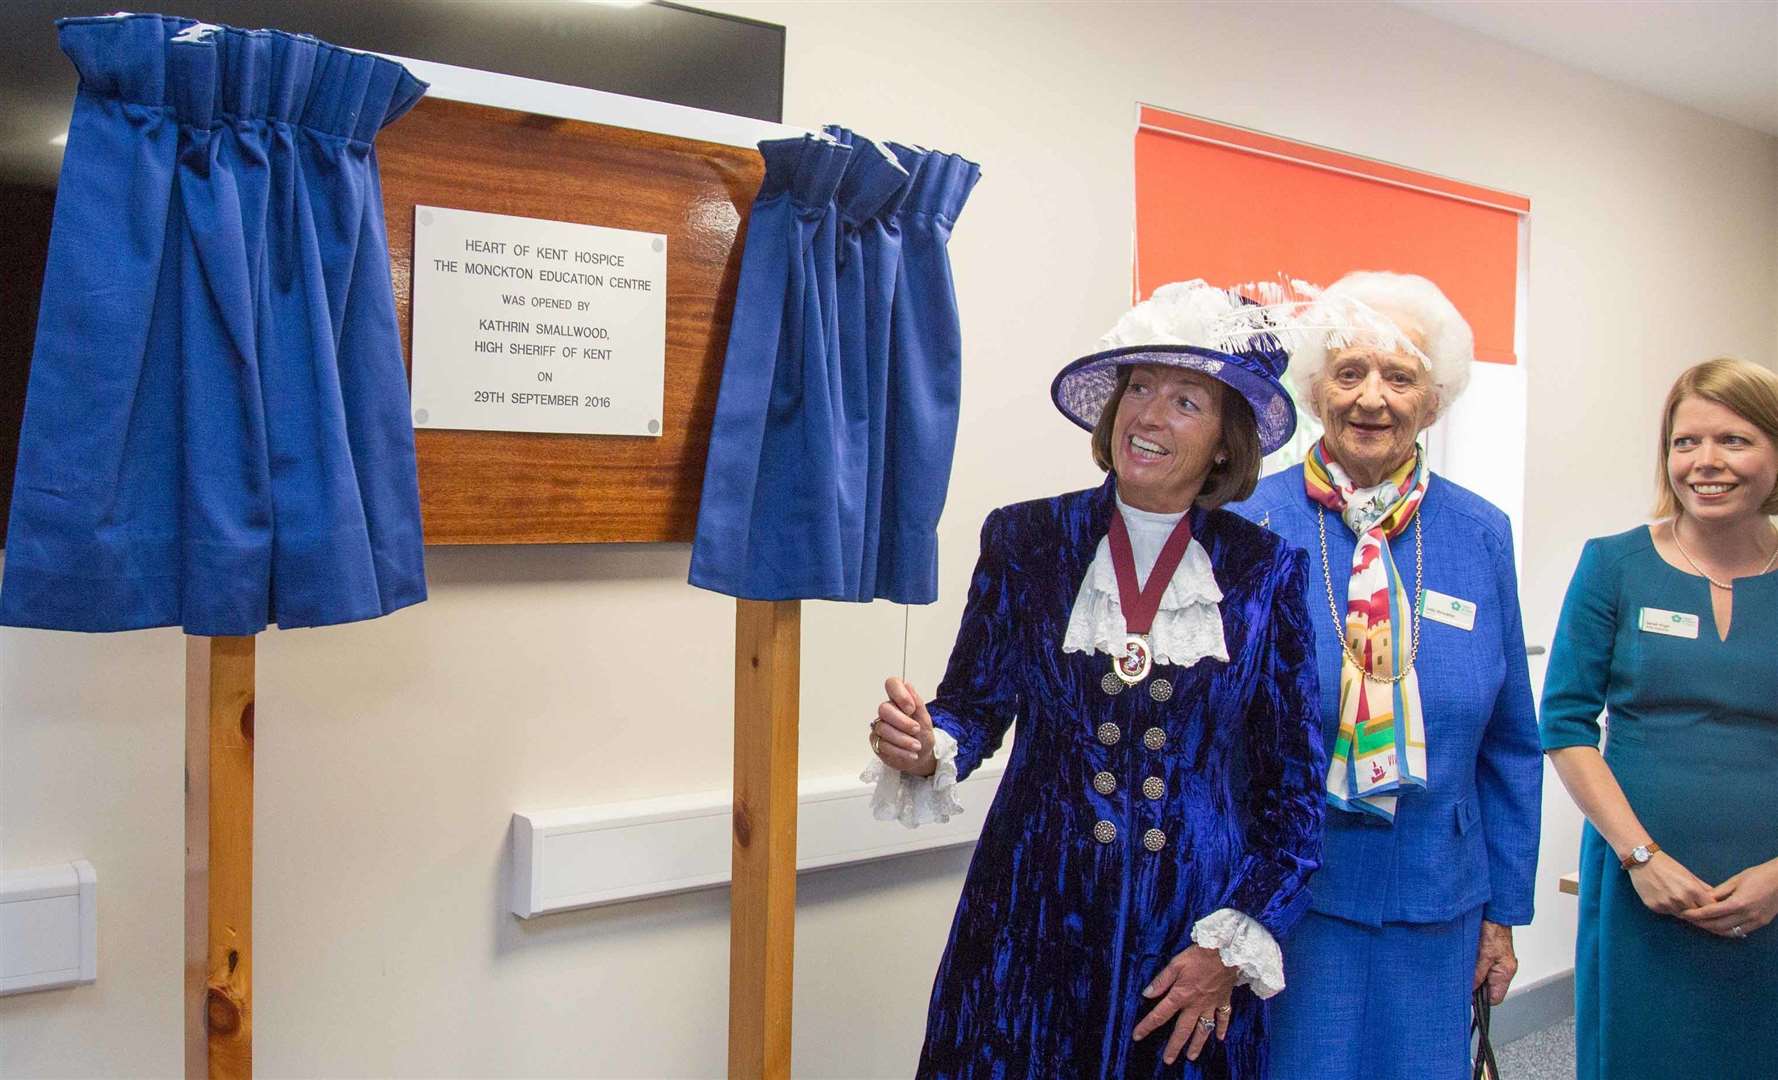 The Monckton Education Centre at Heart of Kent Hospice was opened in 2016 by Kathrin Smallwood High Sheriff of Kent. Picture: Heart of Kent Hospice